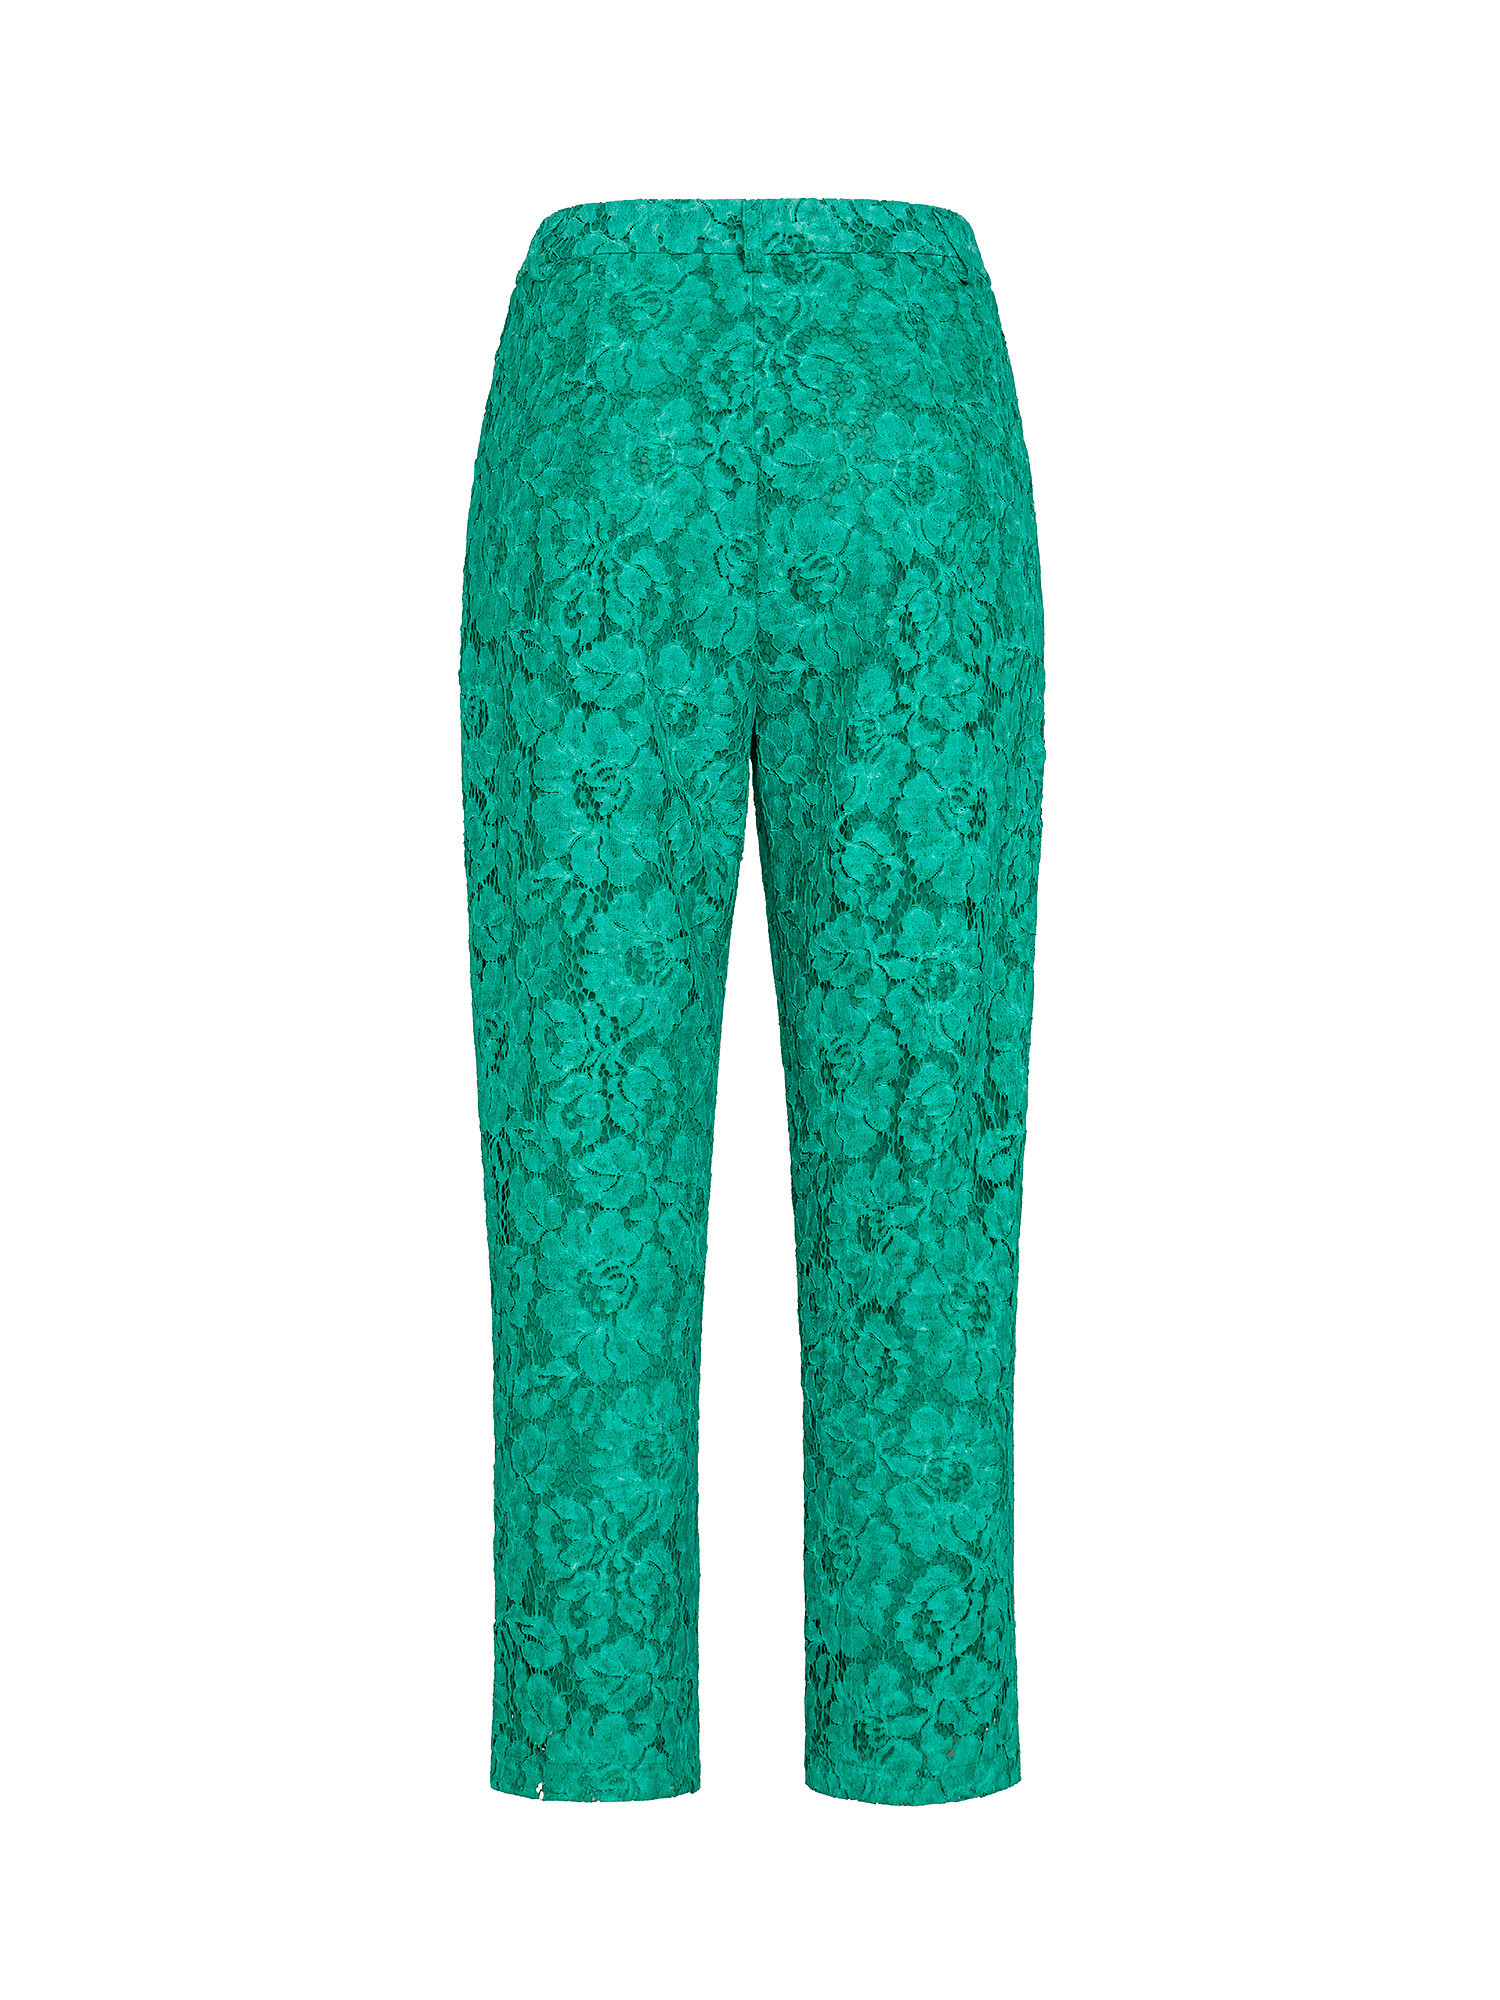 Trousers, Green, large image number 1